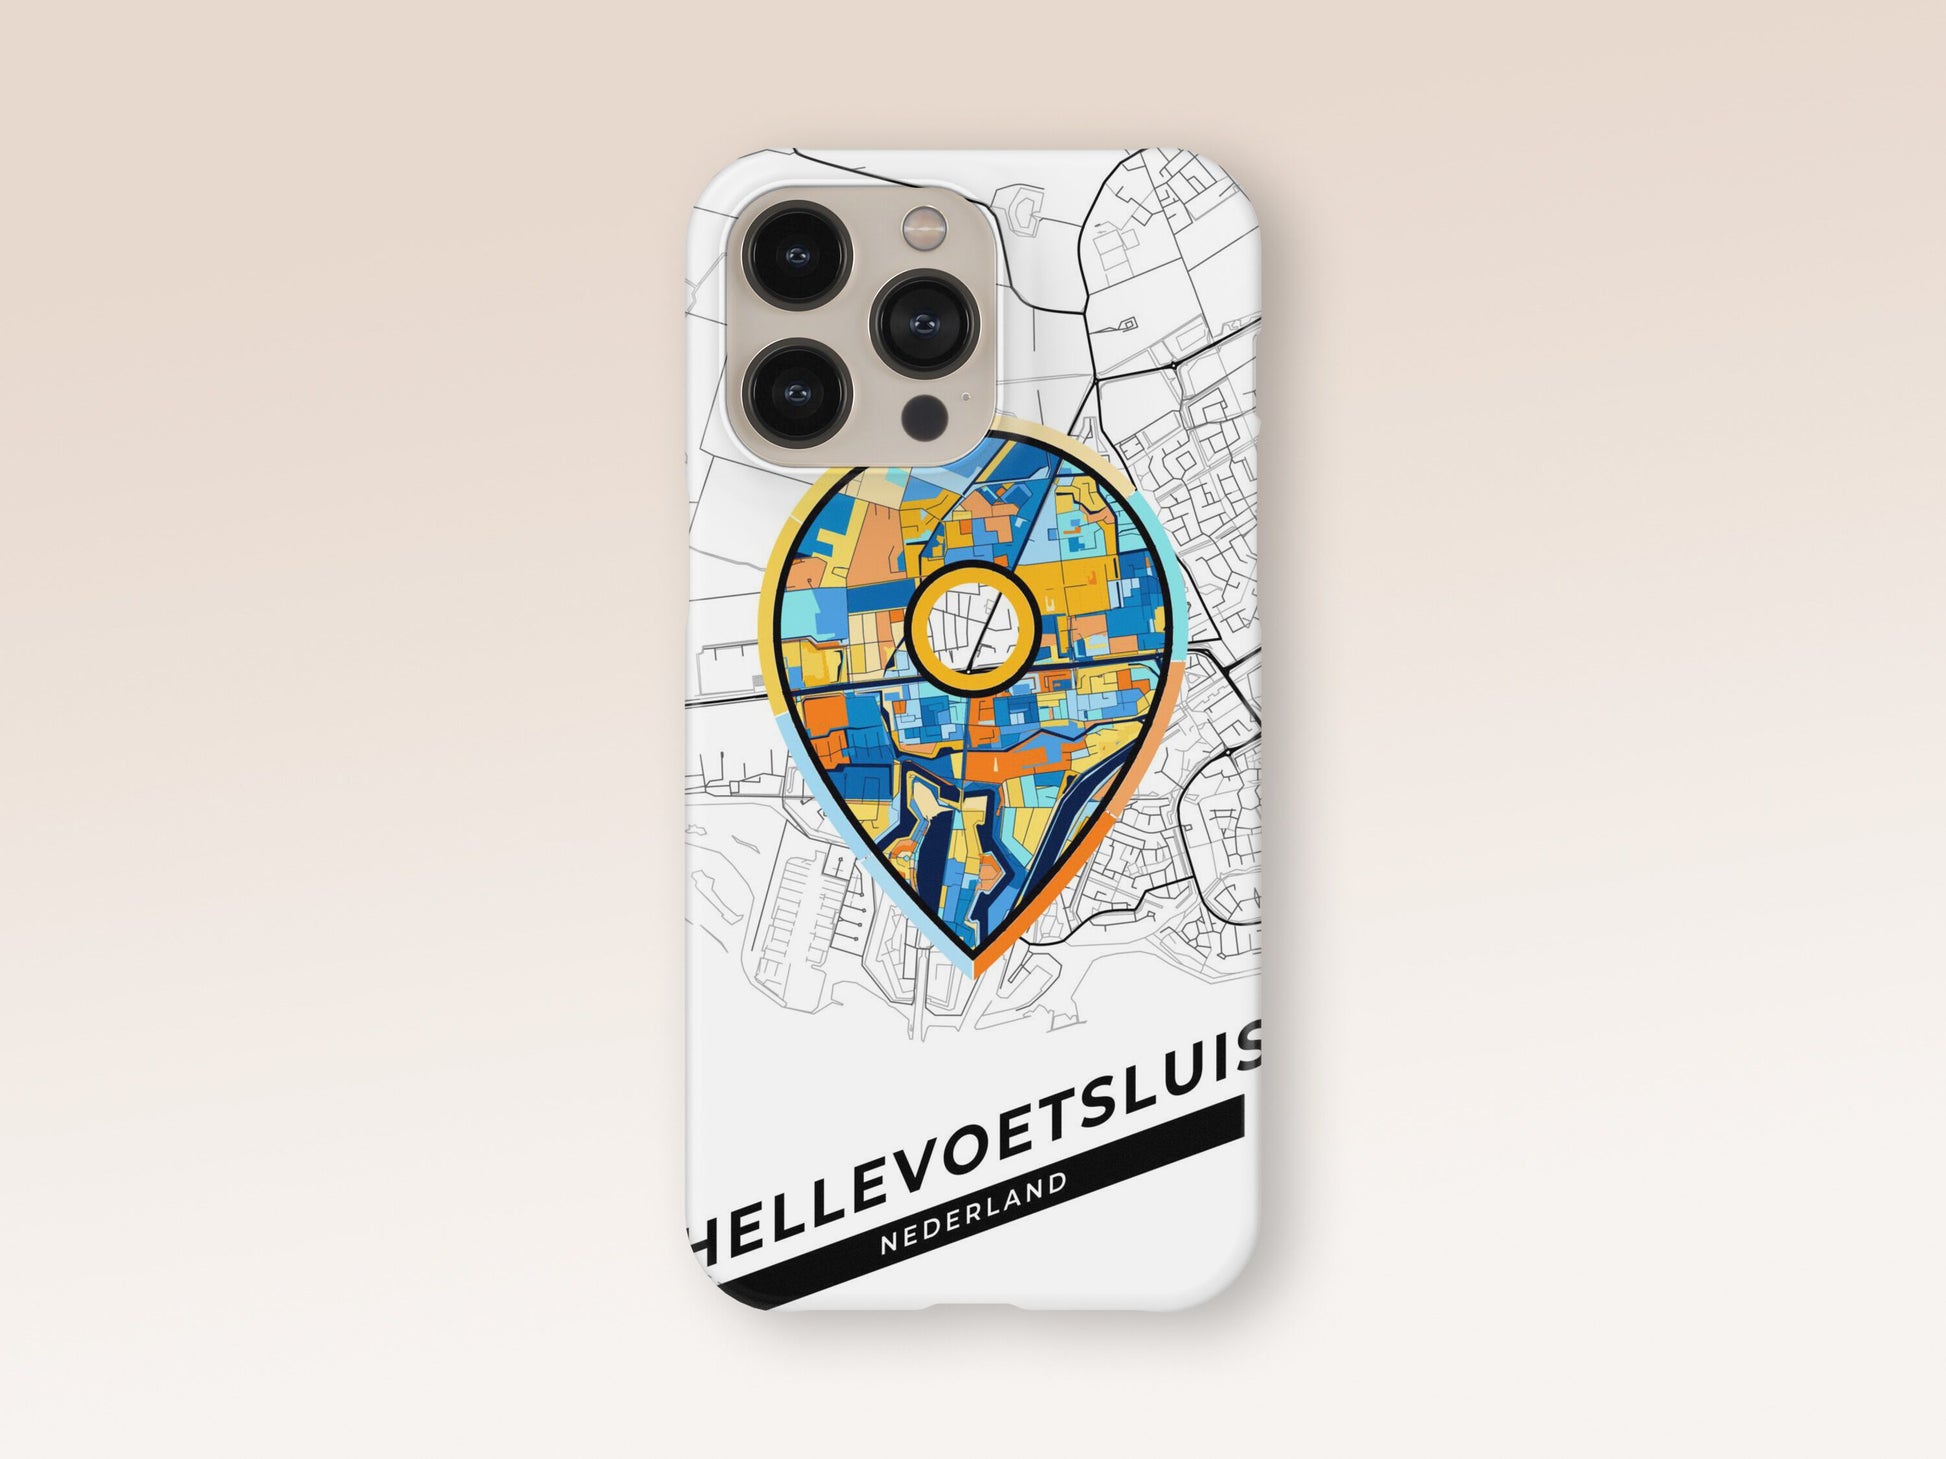 Hellevoetsluis Netherlands slim phone case with colorful icon. Birthday, wedding or housewarming gift. Couple match cases. 1